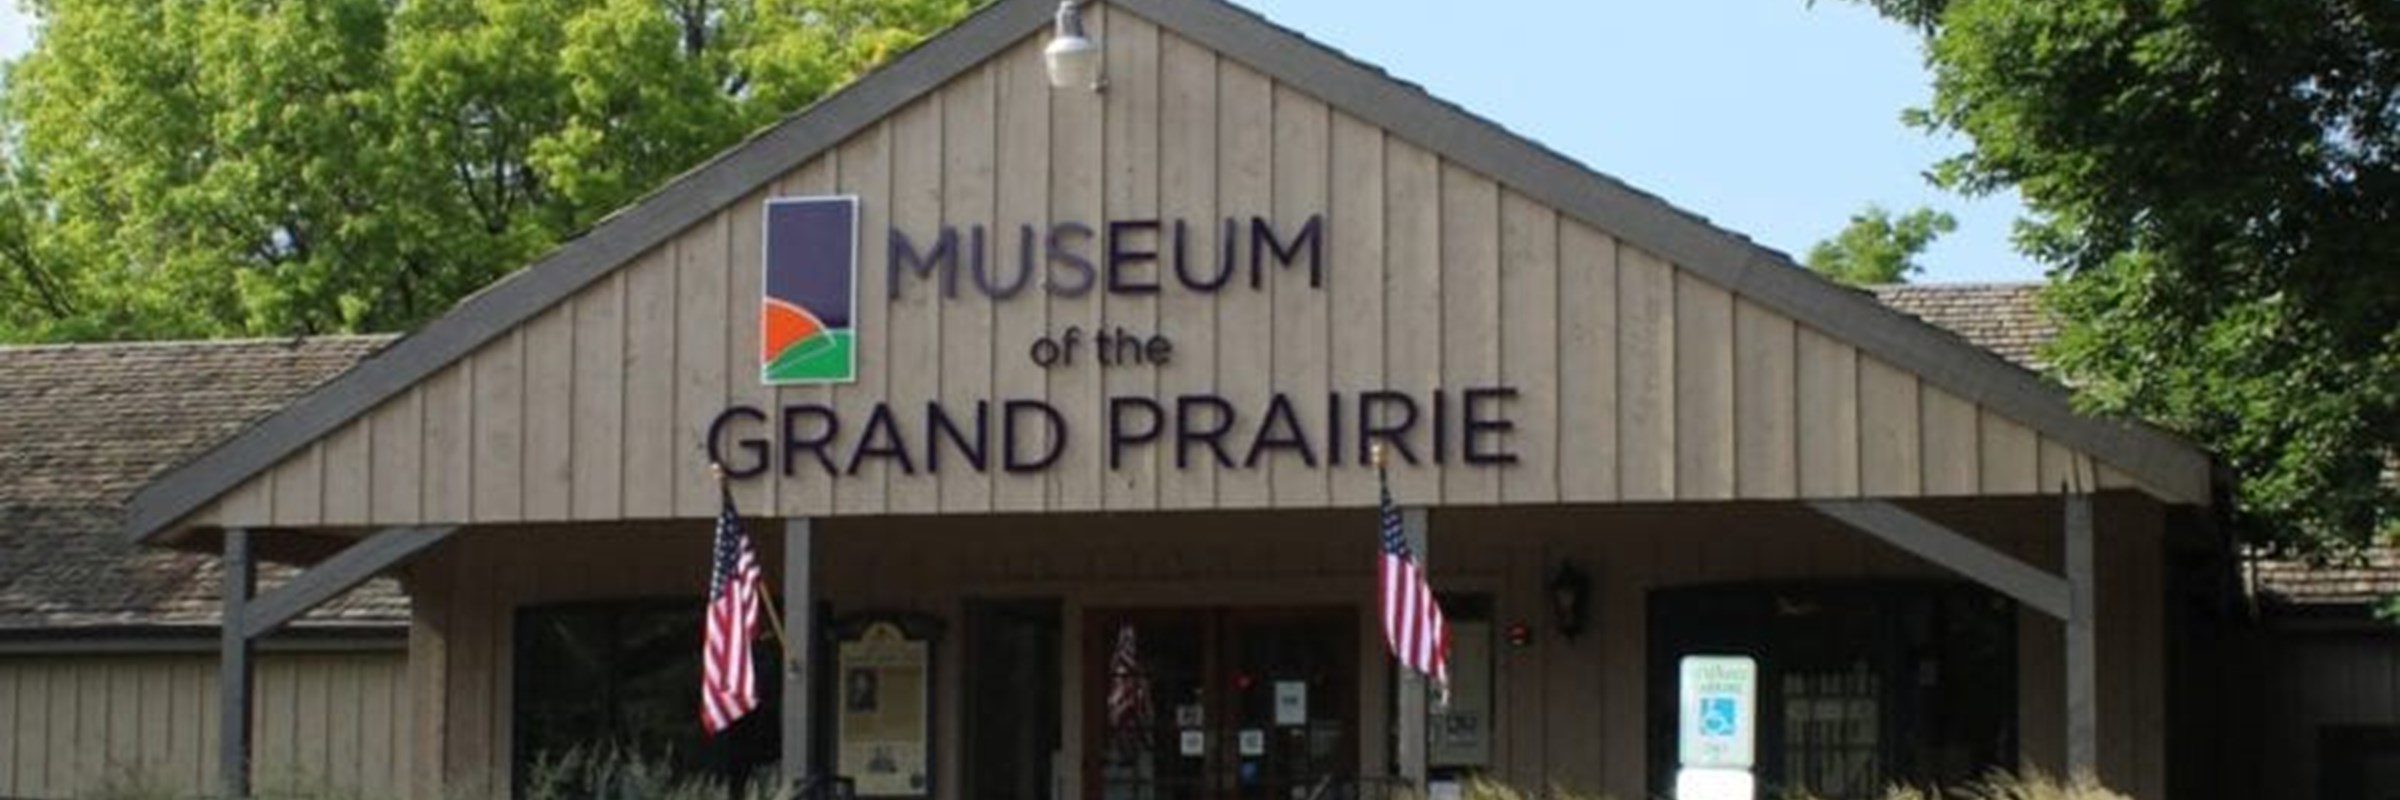 Museum of the Grand Prairie and the Homer Lake Interpretive Center to Reopen